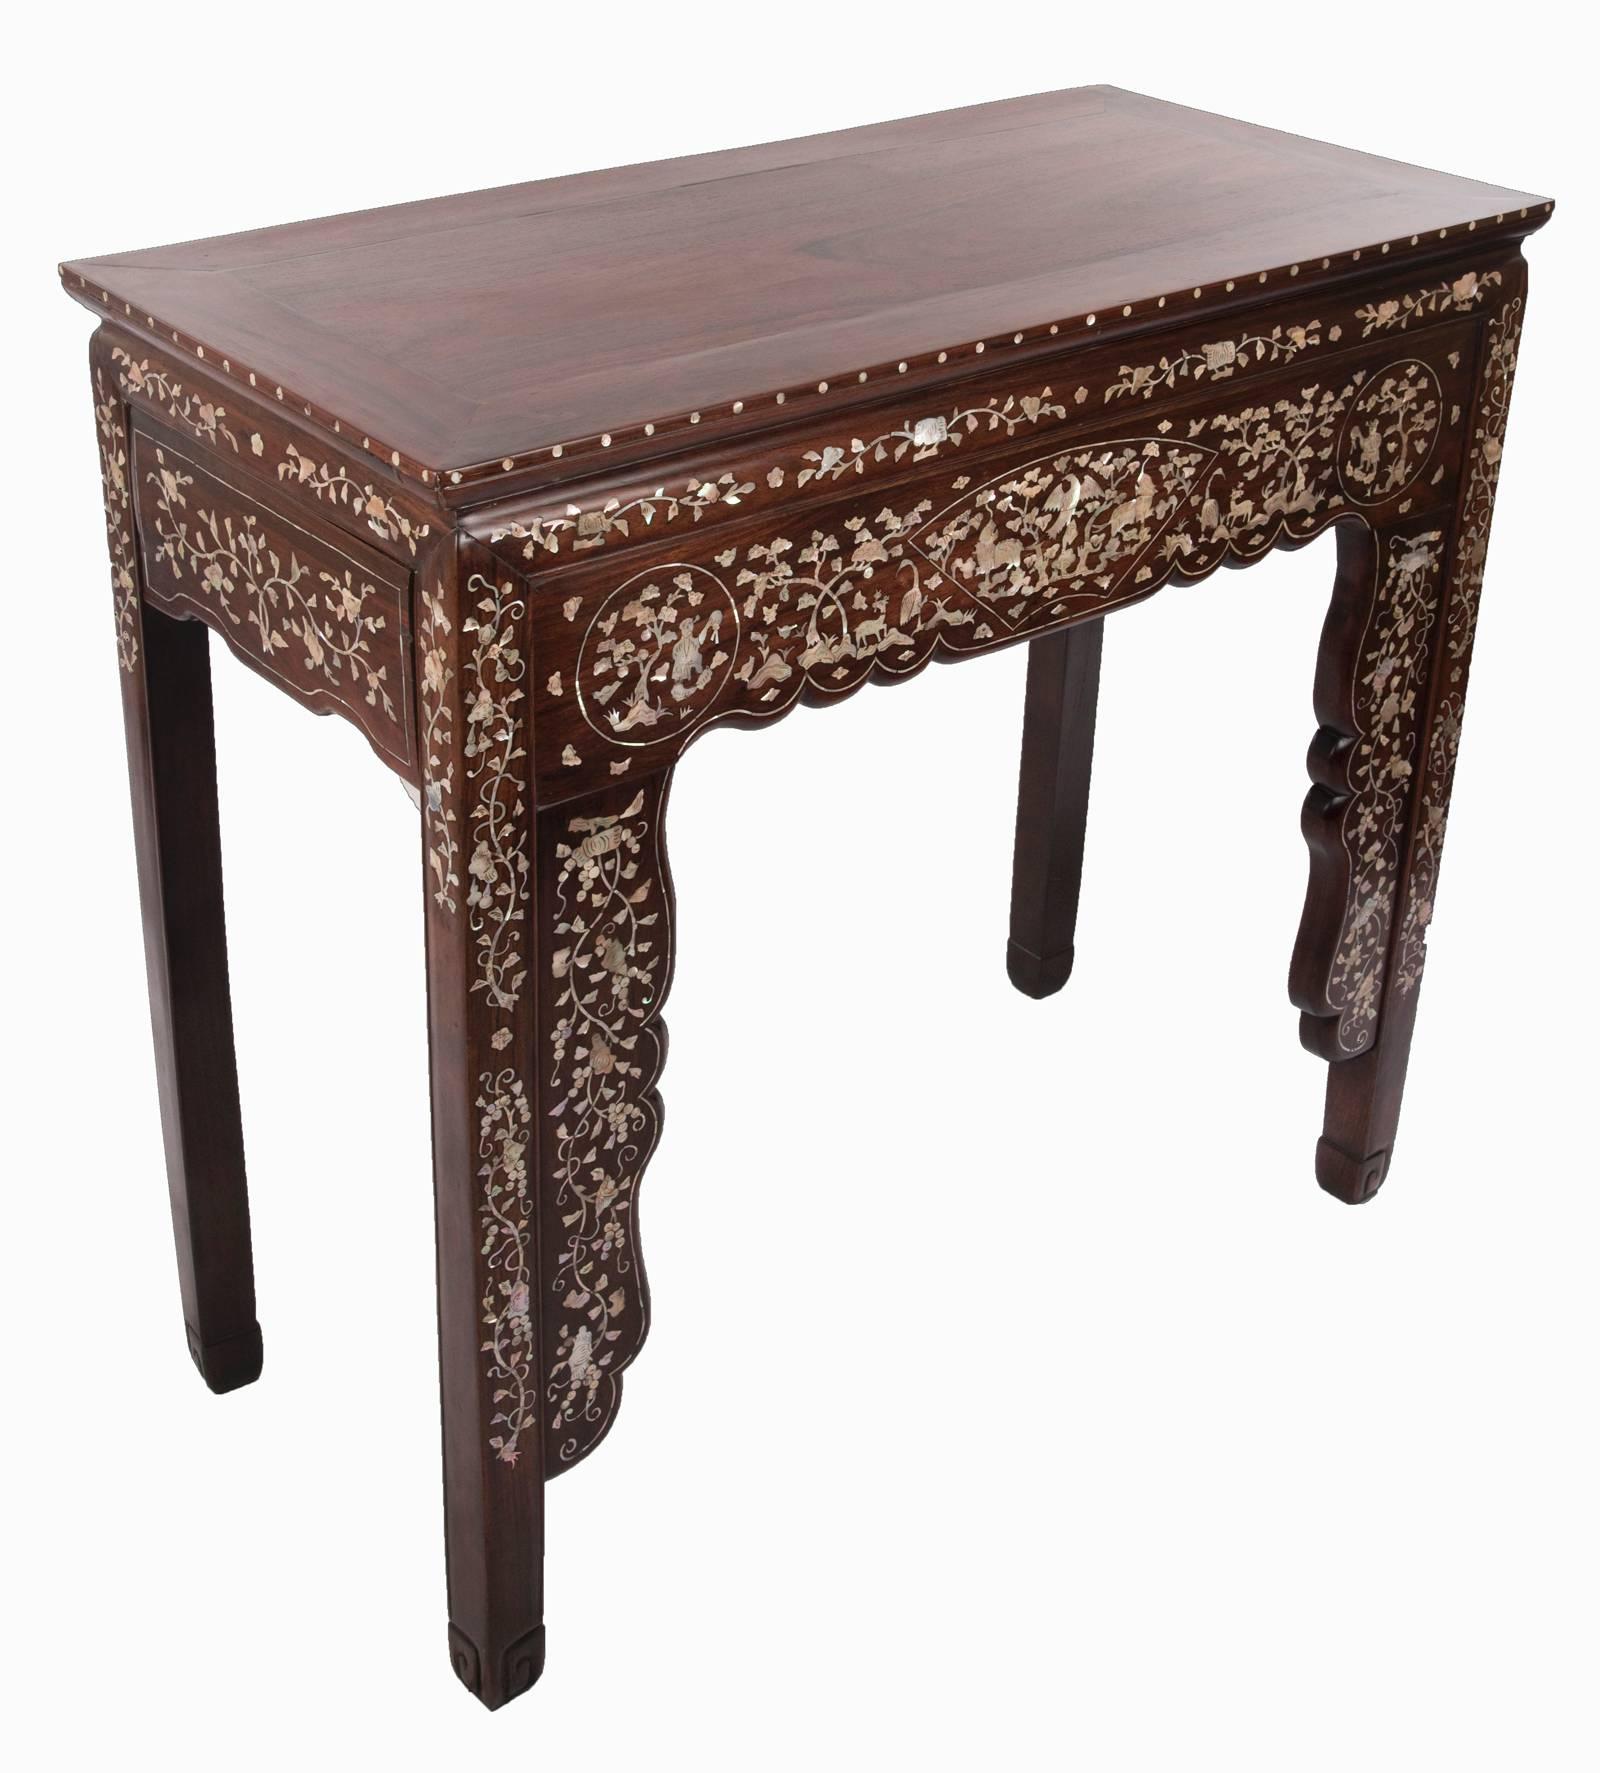 A 19th century Chinese hardwood and mother-of-pearl inlaid console table. The plain tabletop is a compliment to the elegantly adorned frieze of scrolling florals above the apron that is ornately decorated with natural vegetation, animals and Chinese